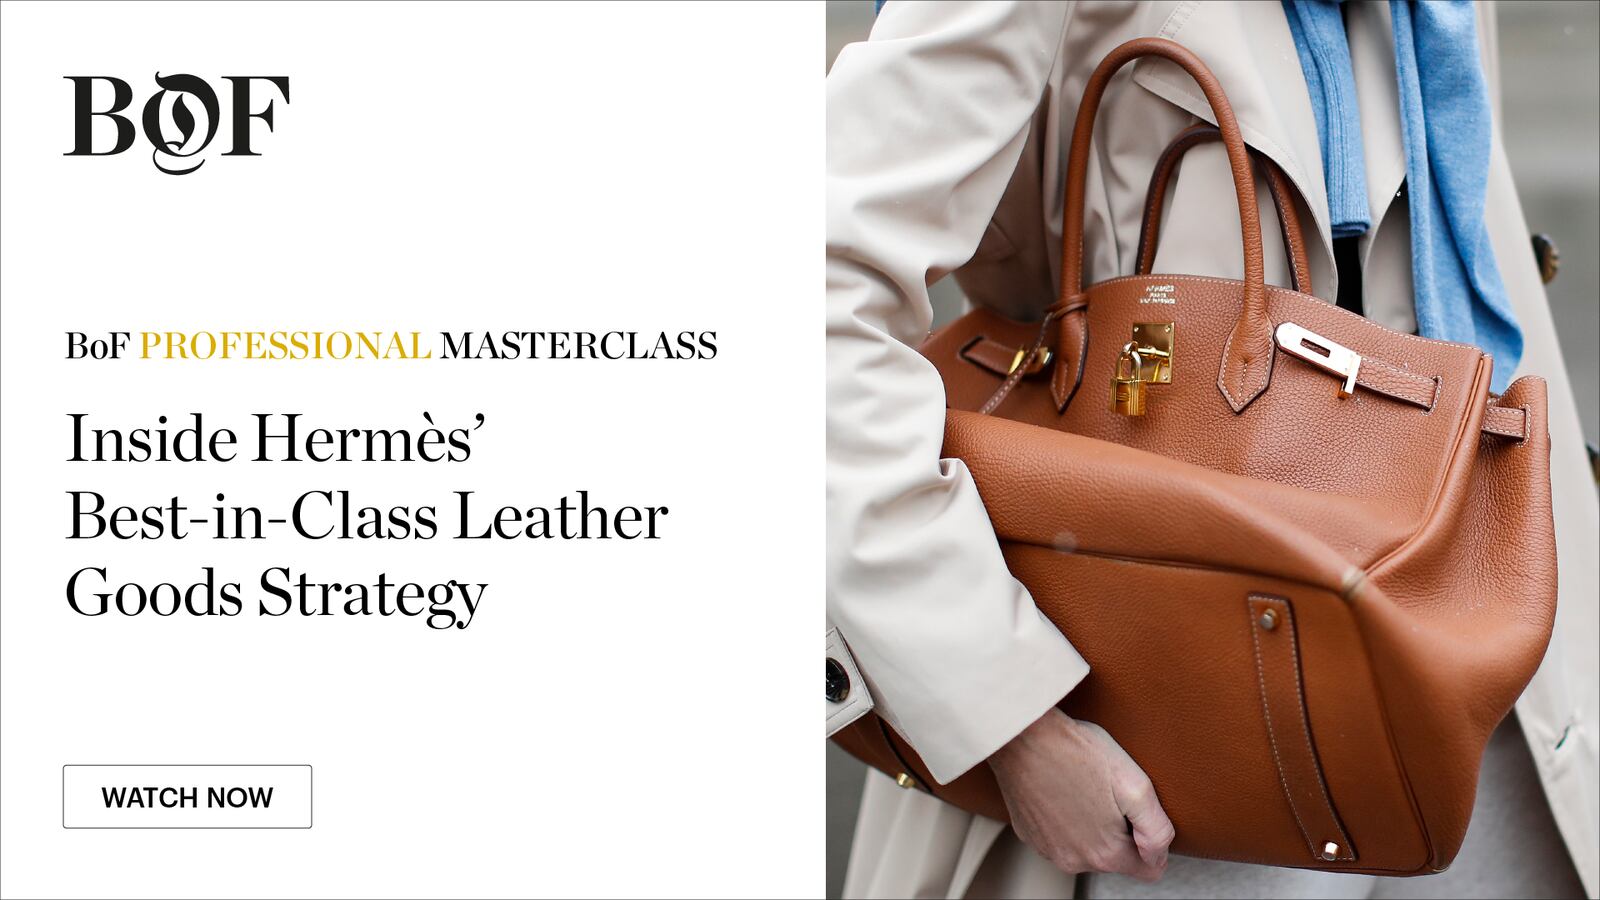 BoF Professional Masterclass: Inside Hermes' Best-in-Class Leather Goods Strategy